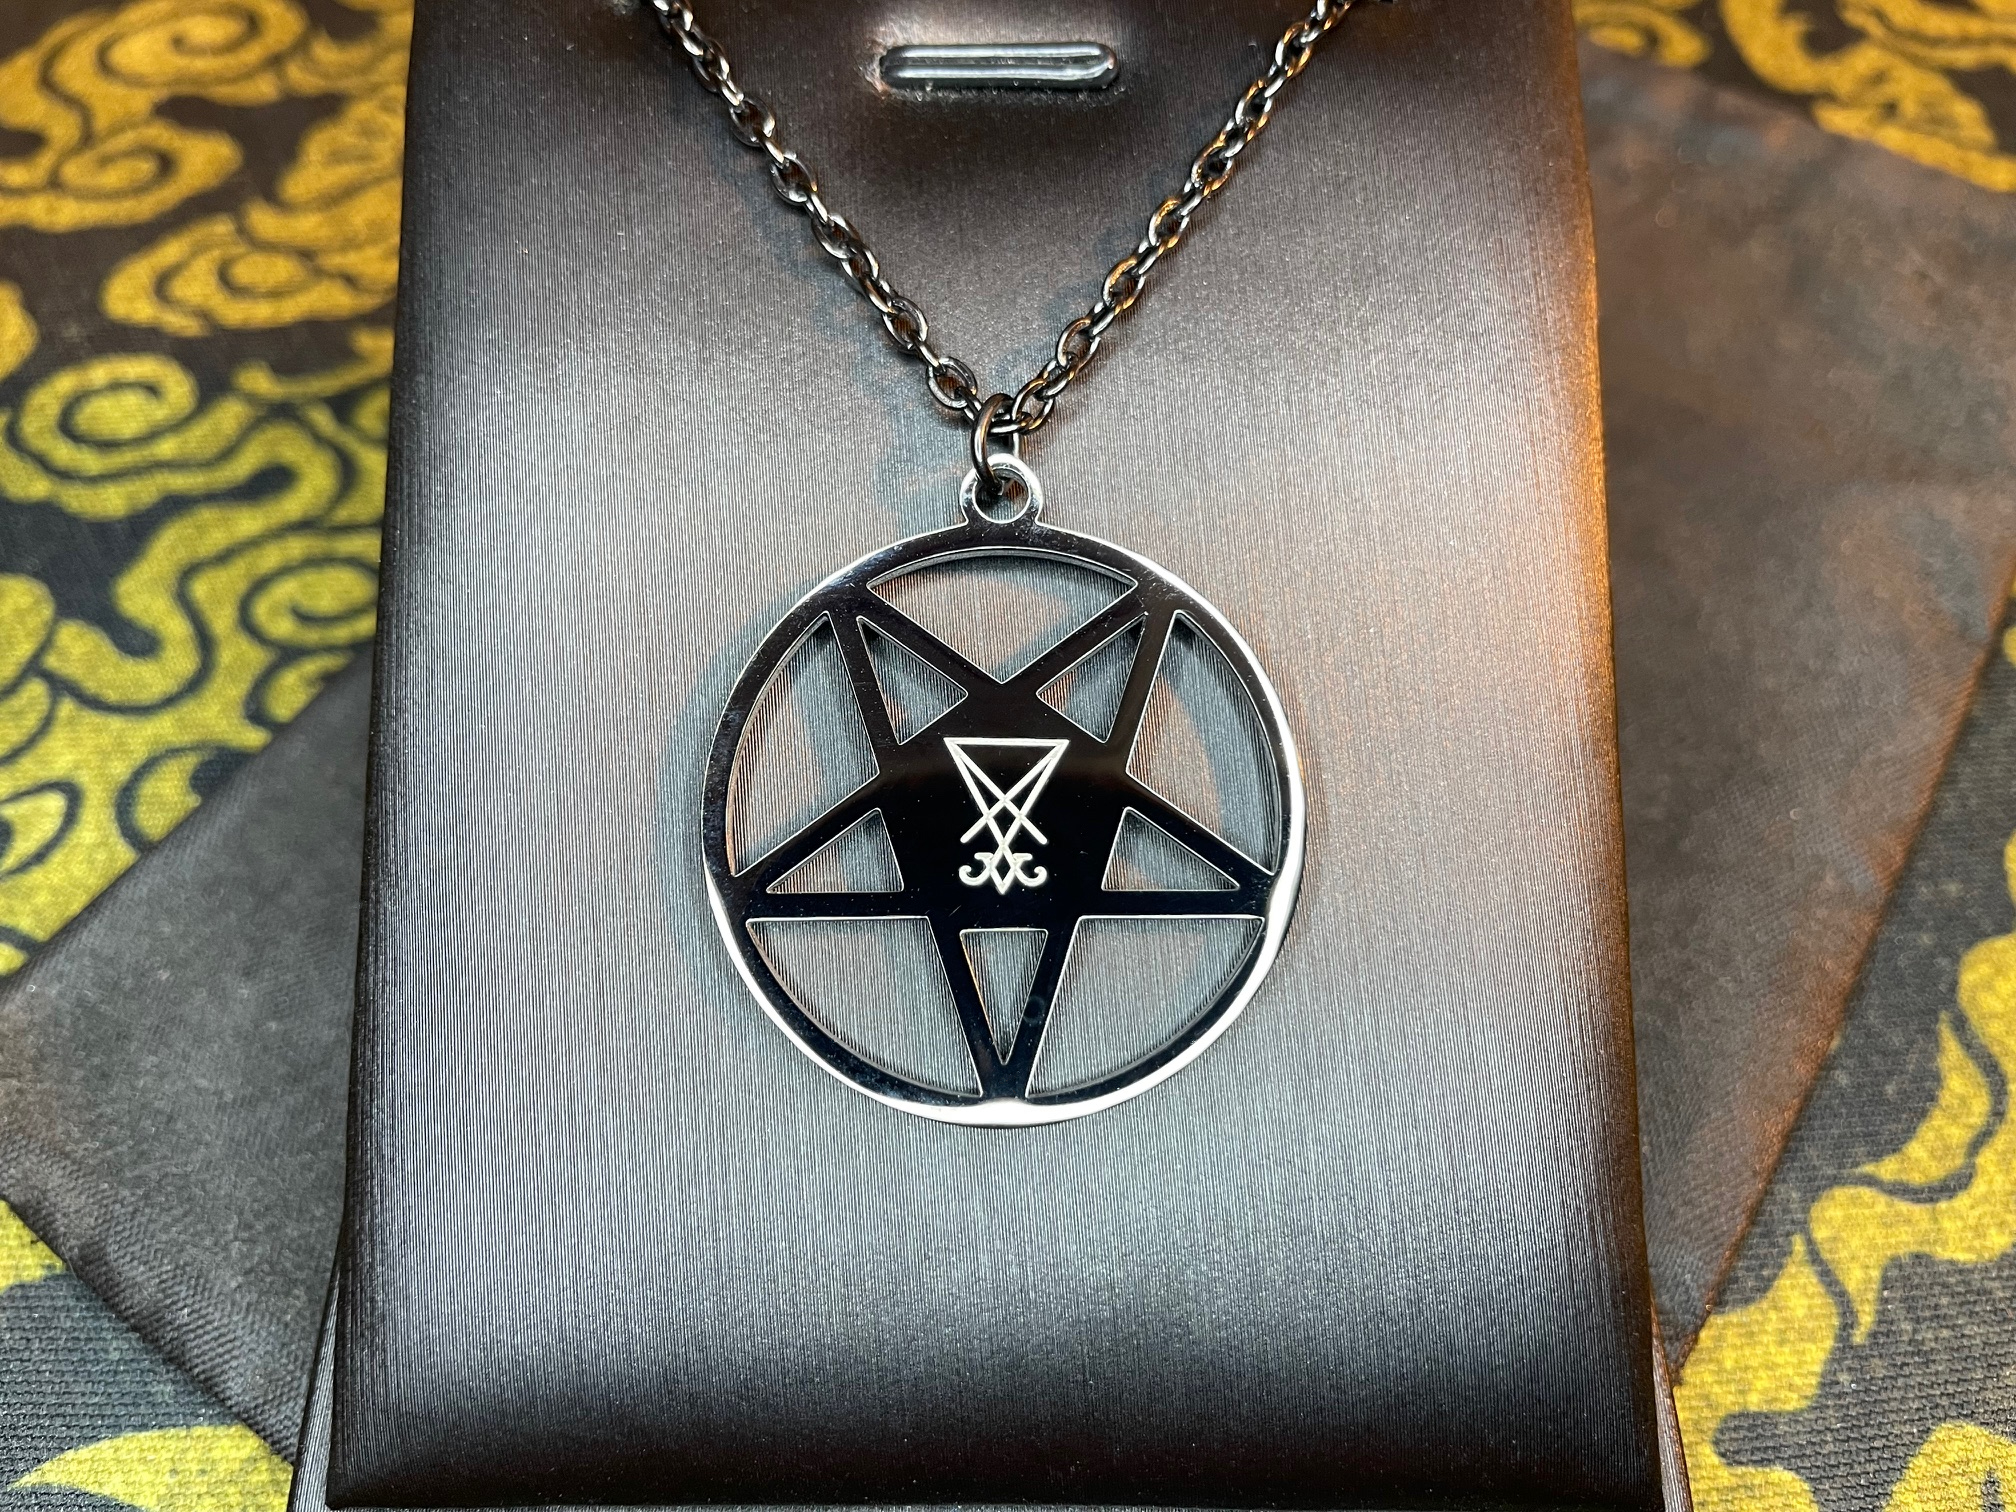 Inverted Pentagram Sigil of Lucifer Upside Down Stainless Steel Pendant Necklace Satanic Gothic Pagan Wiccan Druid Darkness Jewelry Black